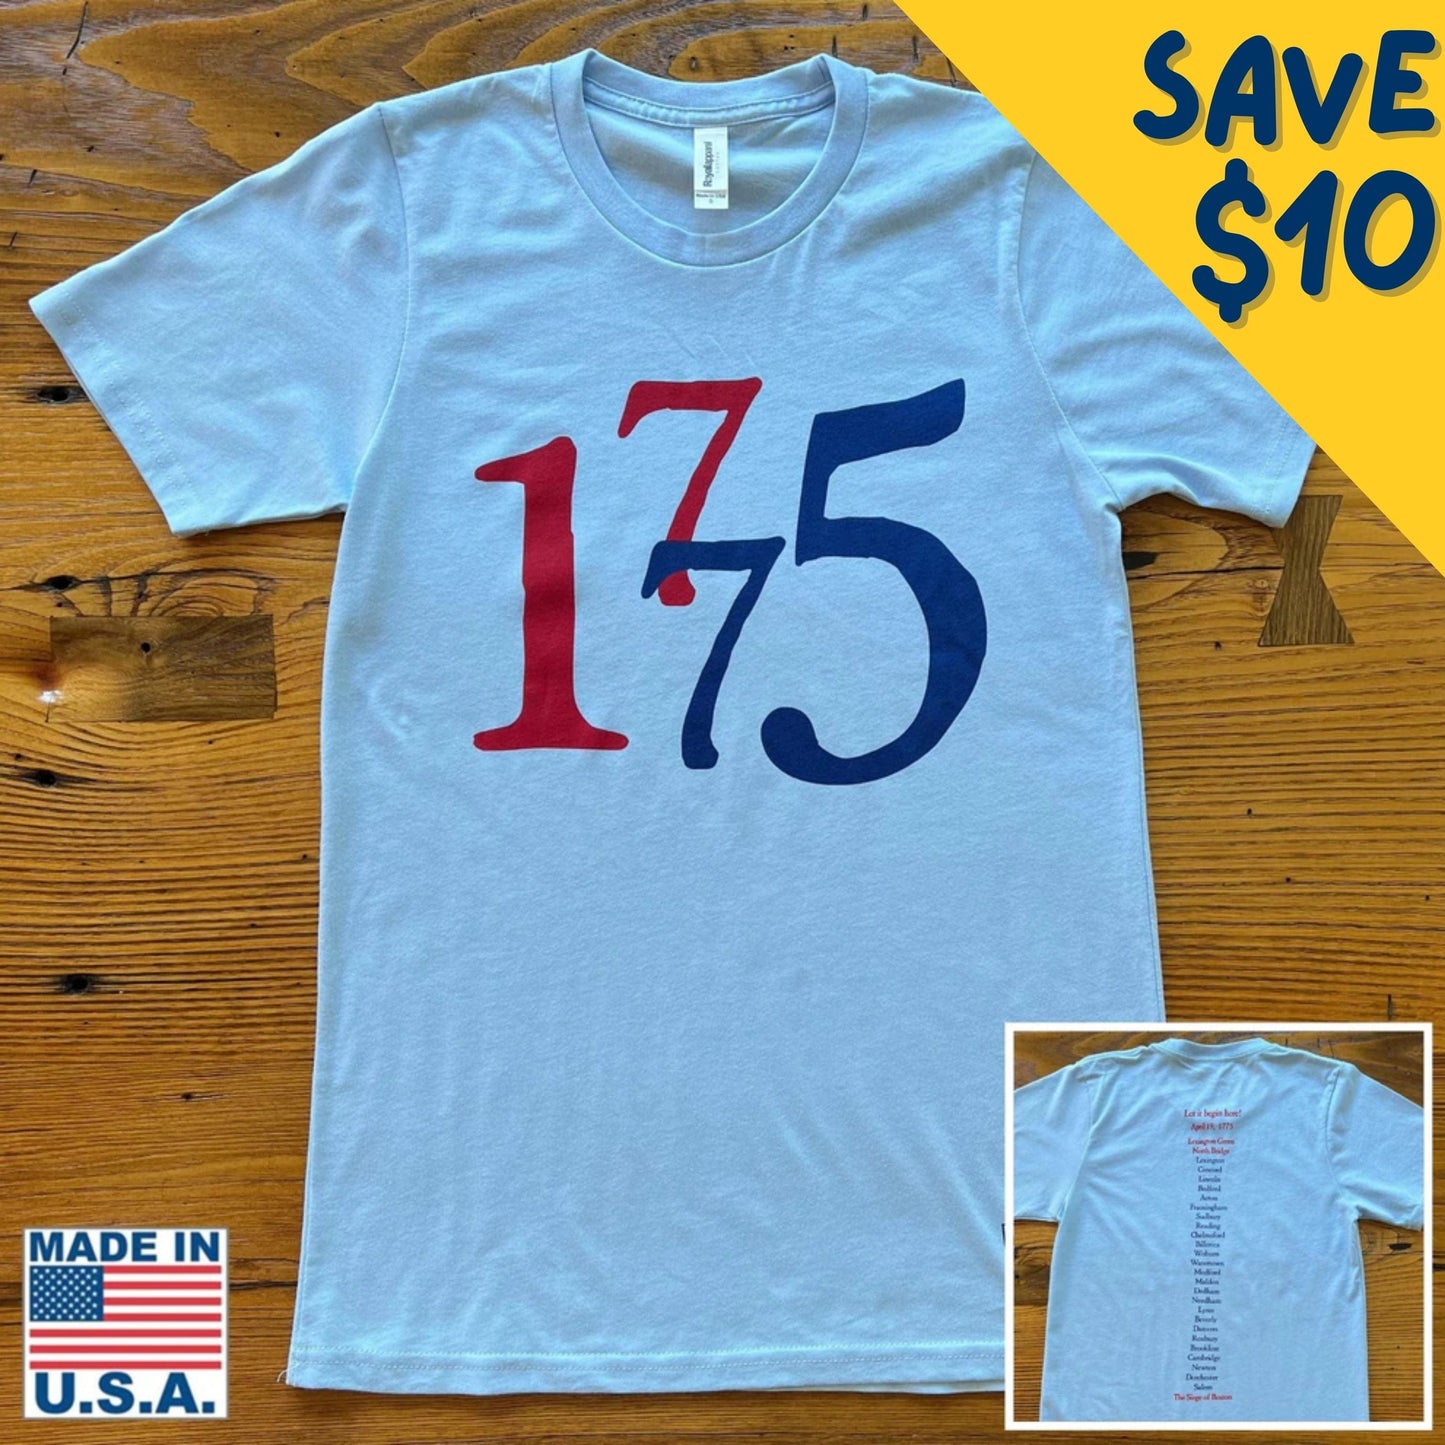 Lexington and Concord "1775" Shirt — Made in the USA